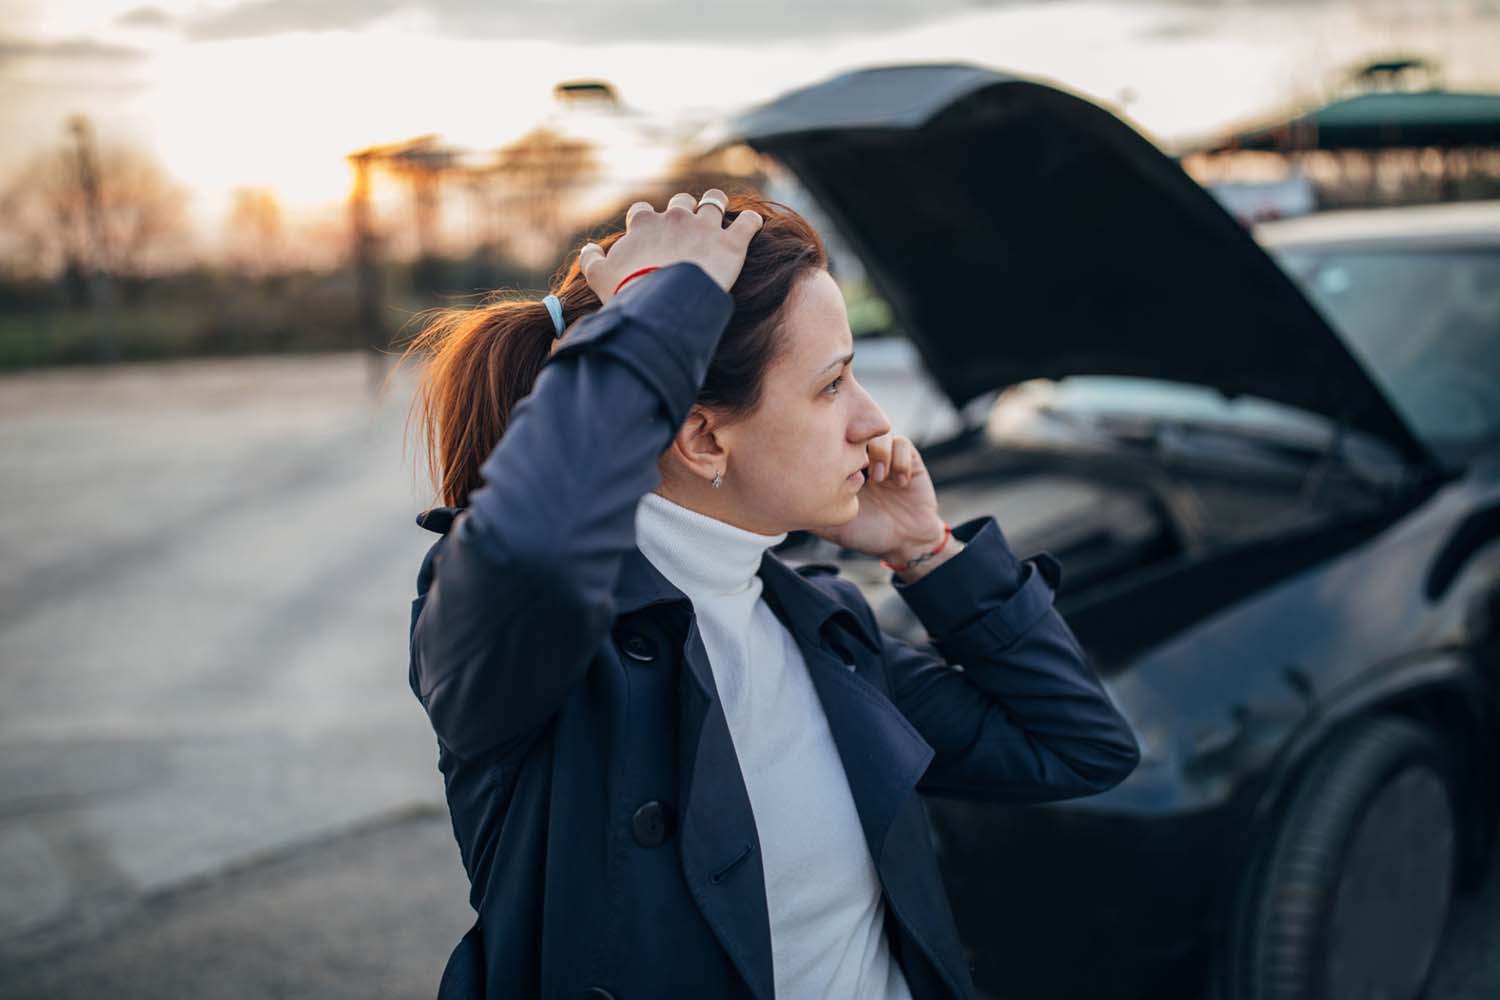 7 Essential Things to Do After Being in a Car Accident